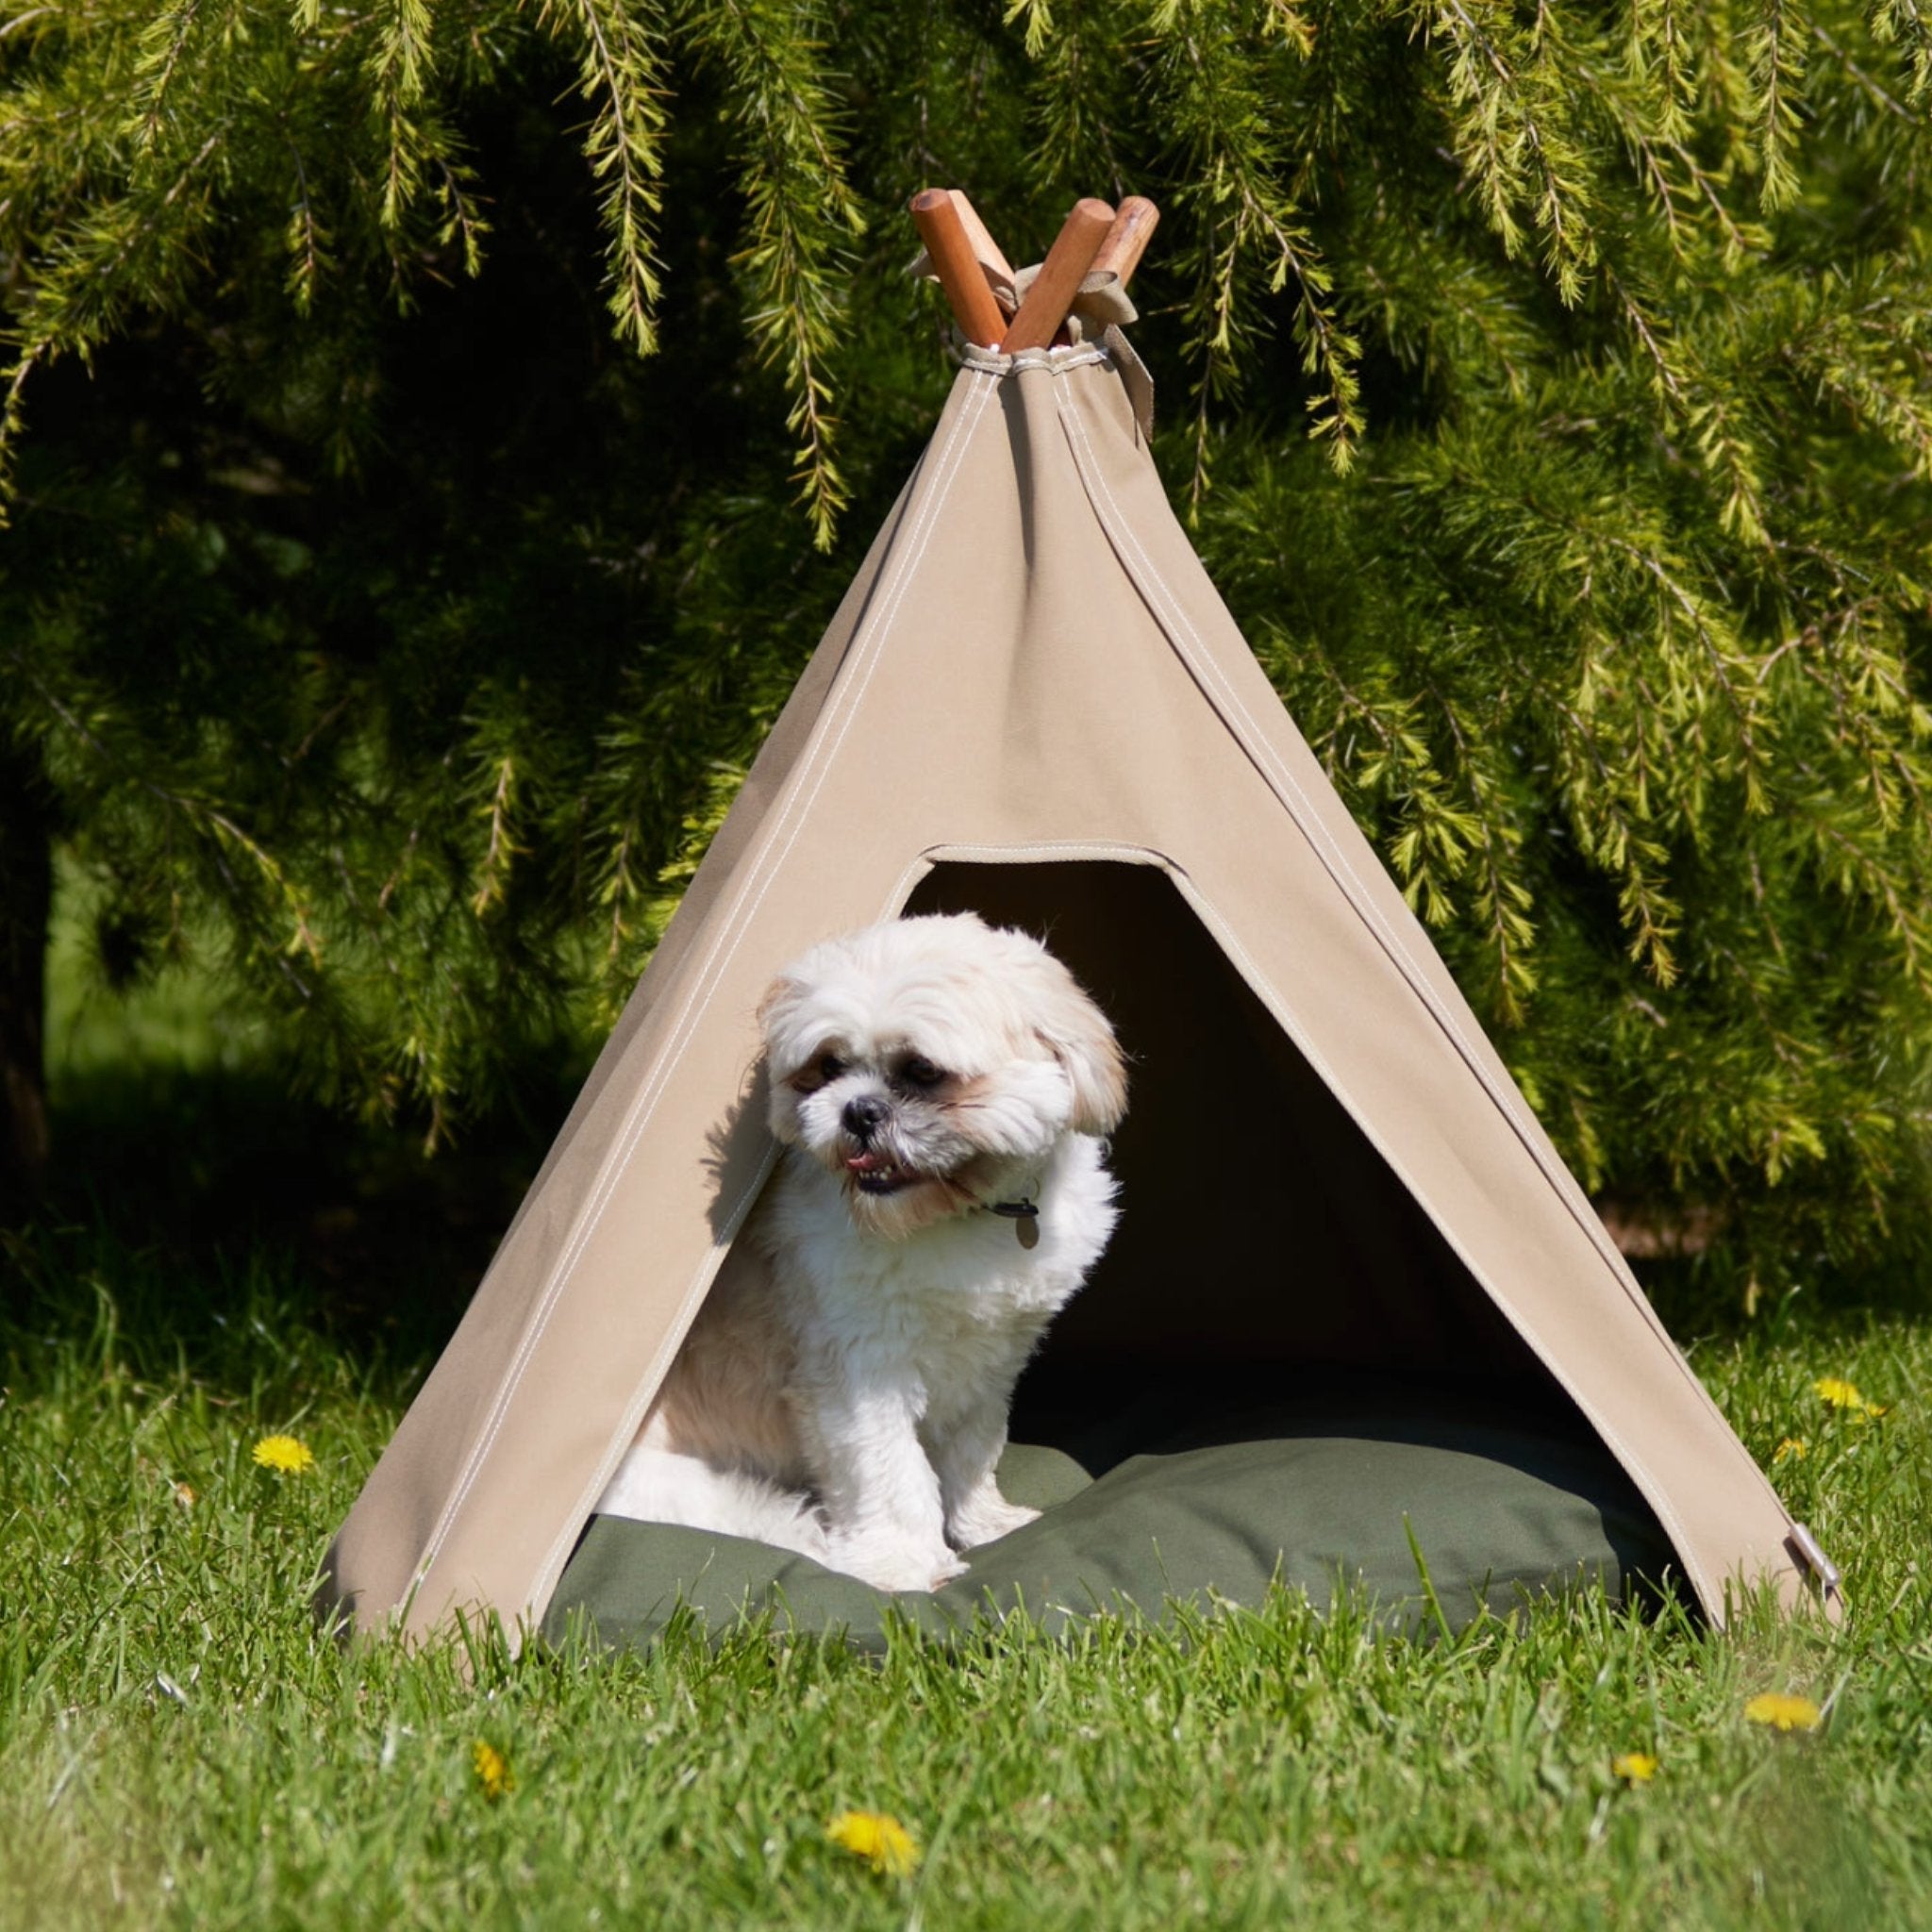 Outdoor dog bed. Dog teepee bed in light sand with Shih Tzu. Waterproof dog bed